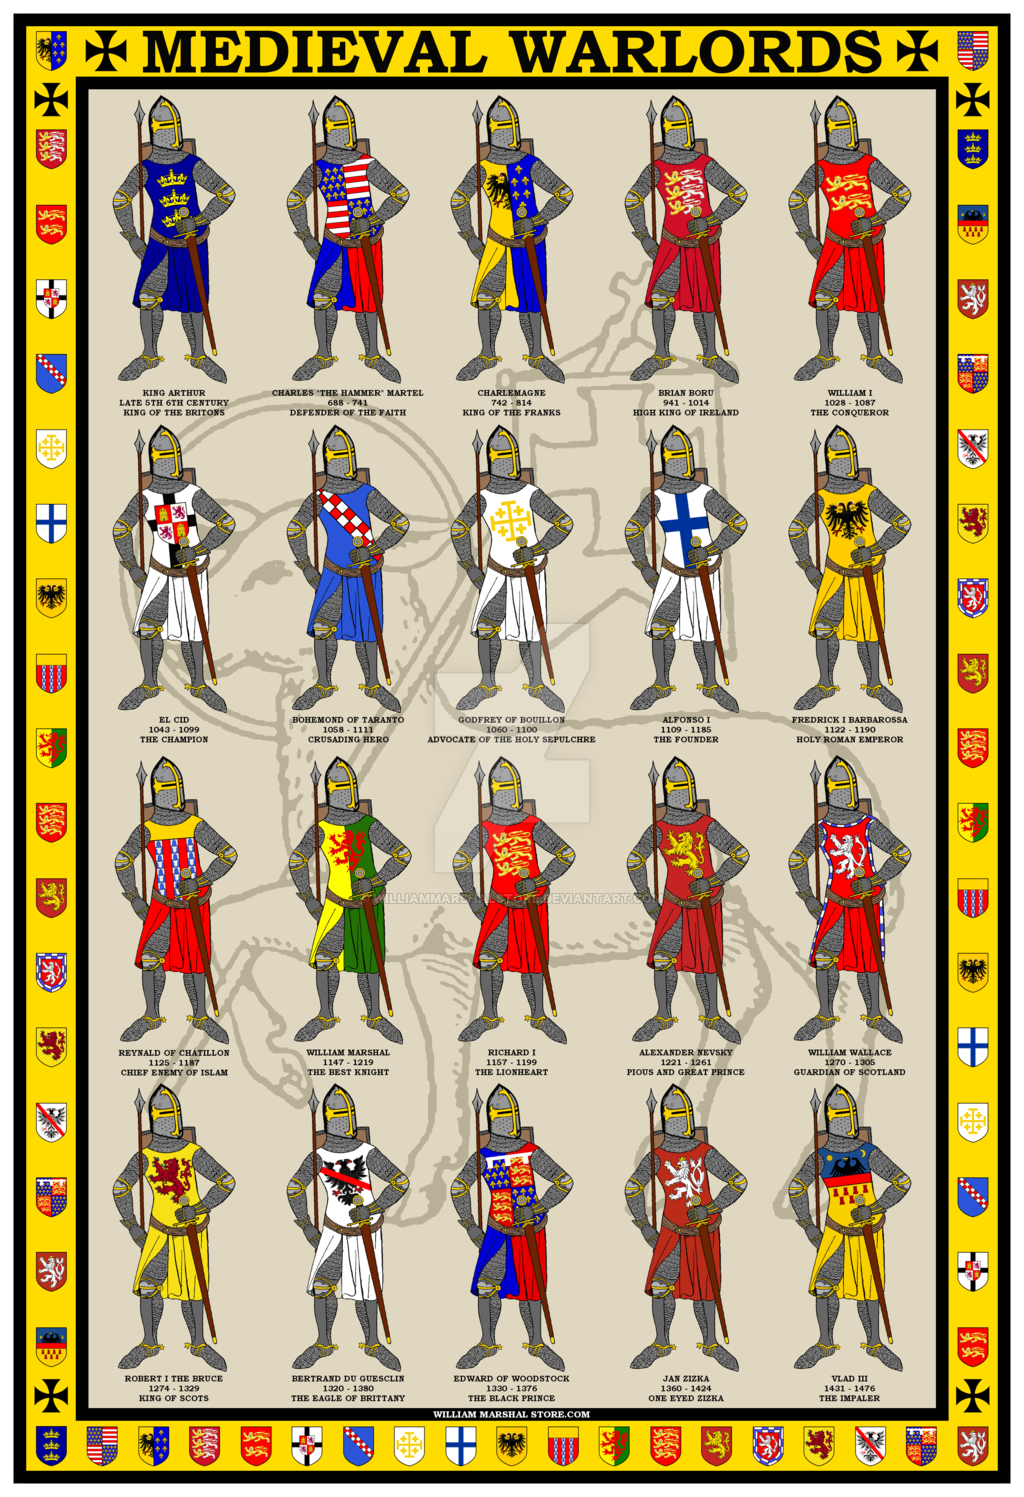 medieval_warlords_poster_by_williammarshalstore-d8qhipc.png